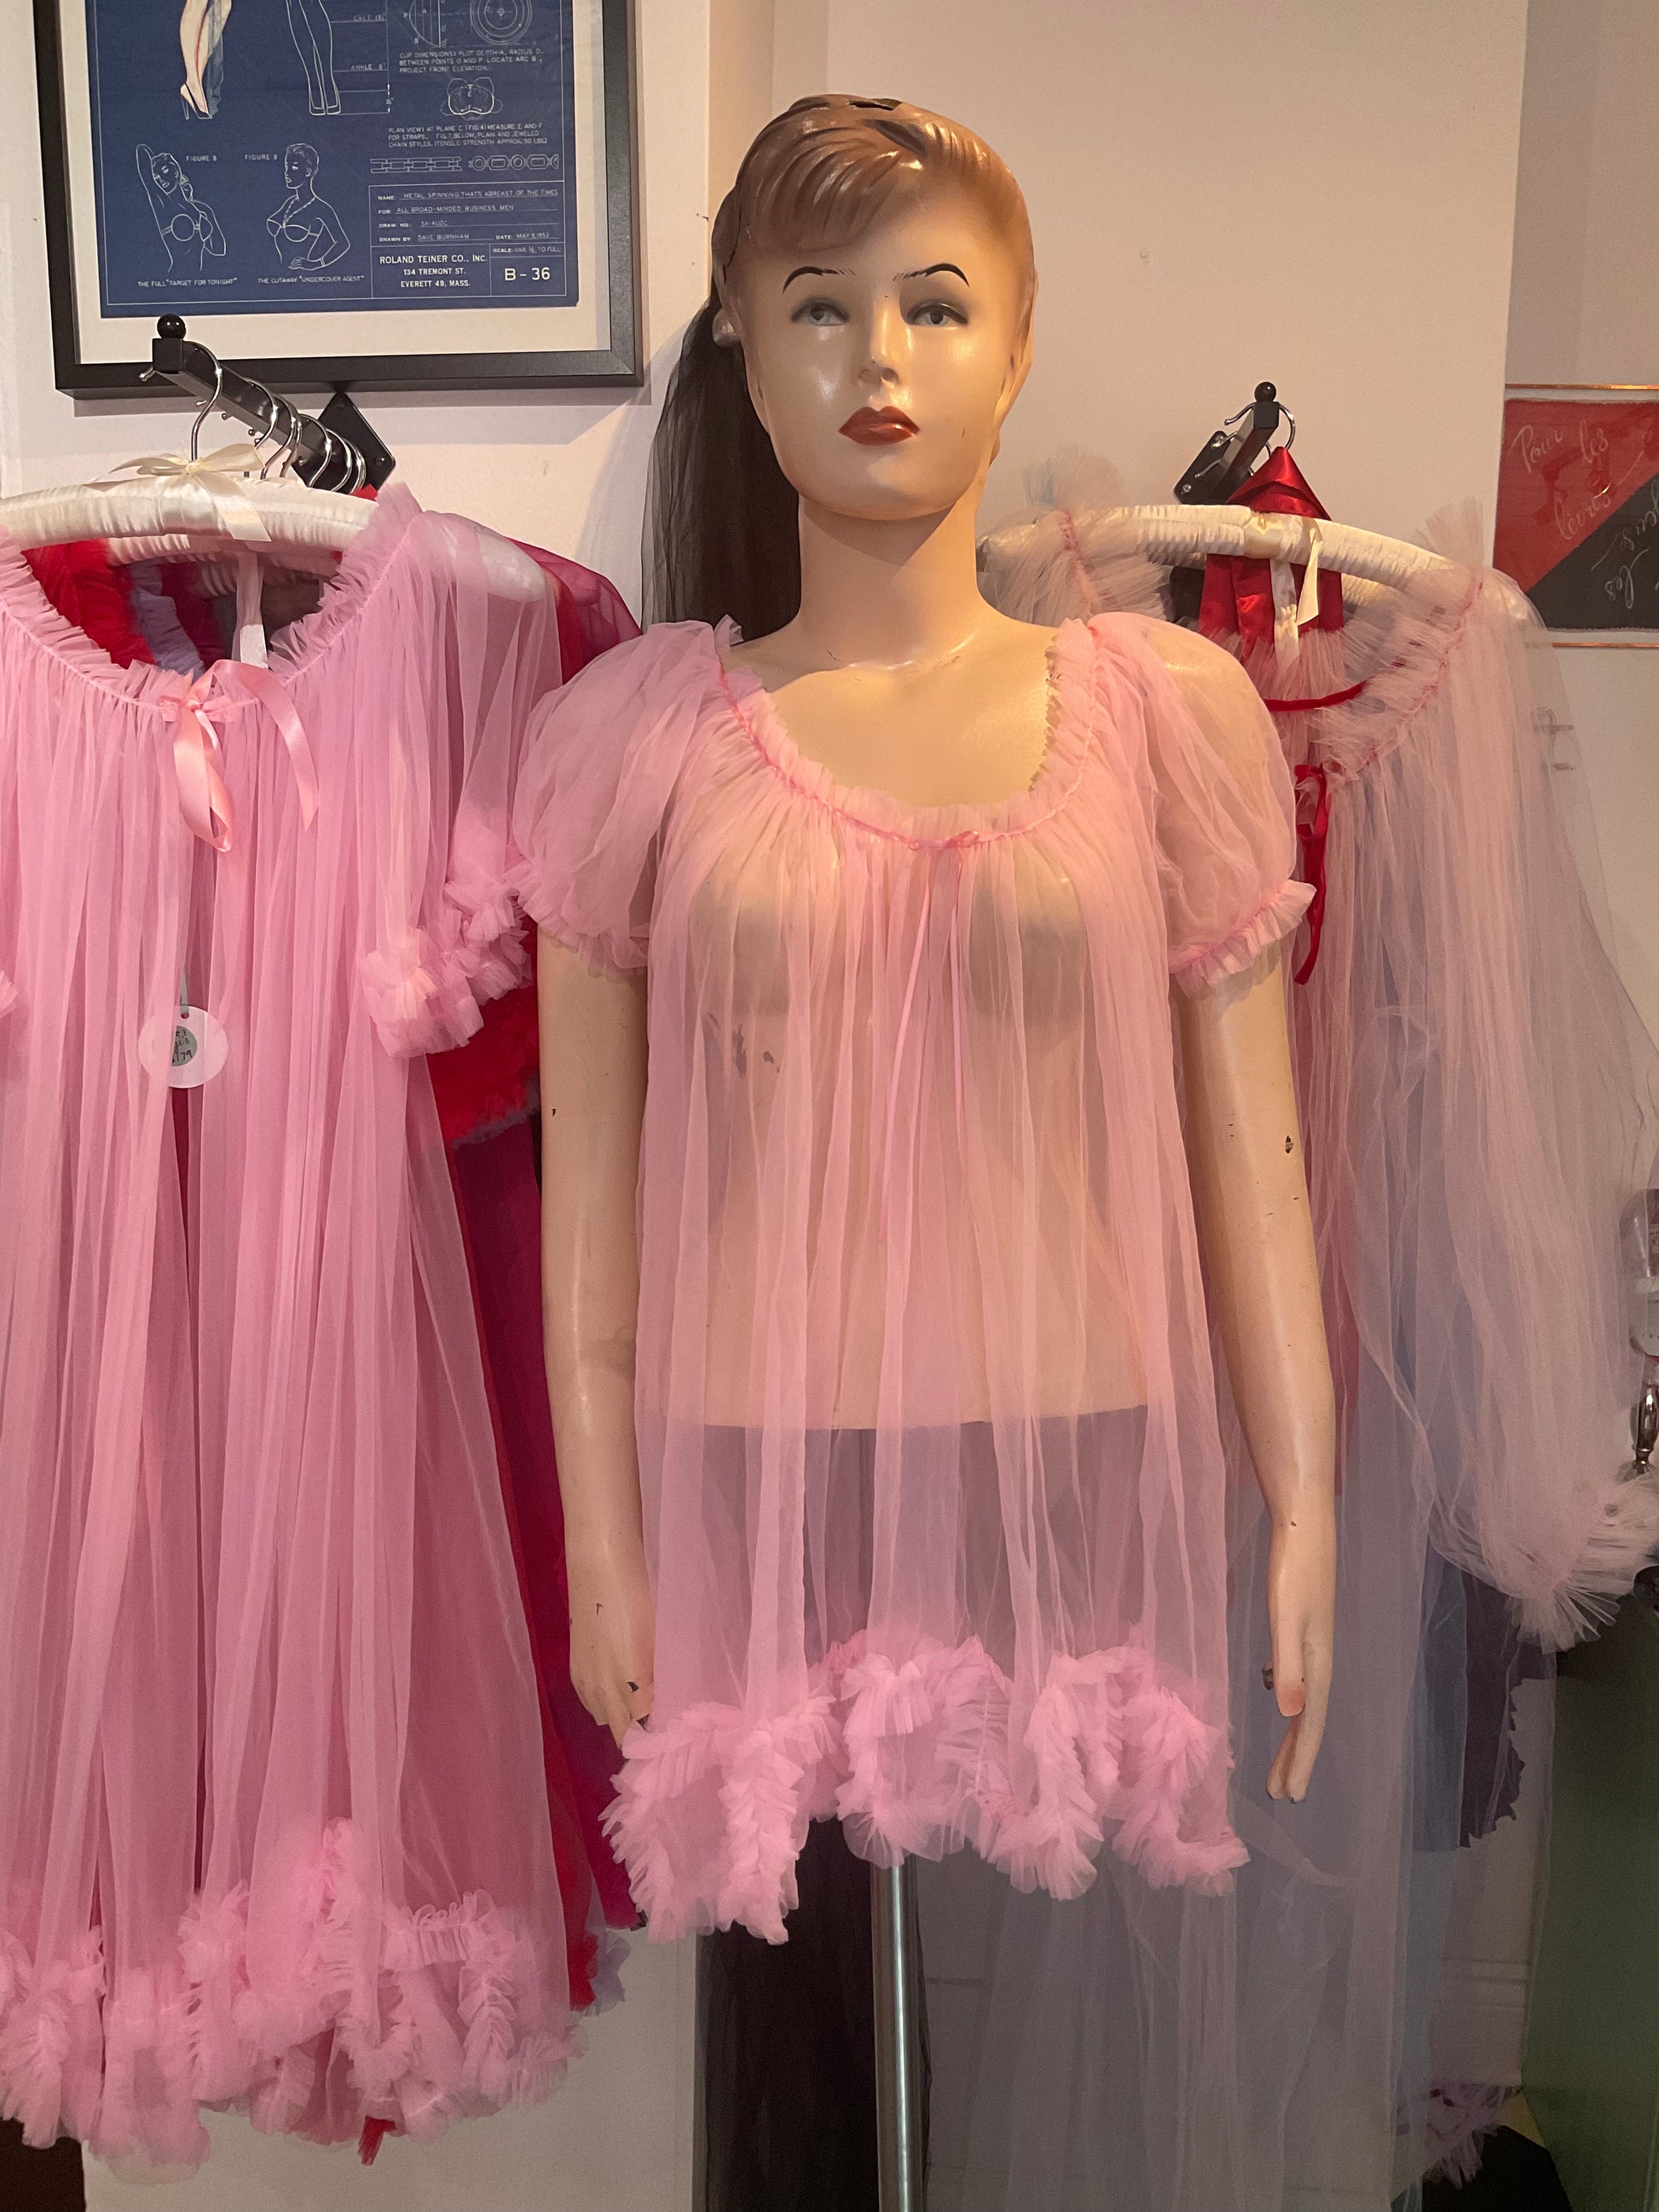 Pink Baby Doll Dress and Ruffled Underwear for Baby Dolls 1950s - Ruby Lane